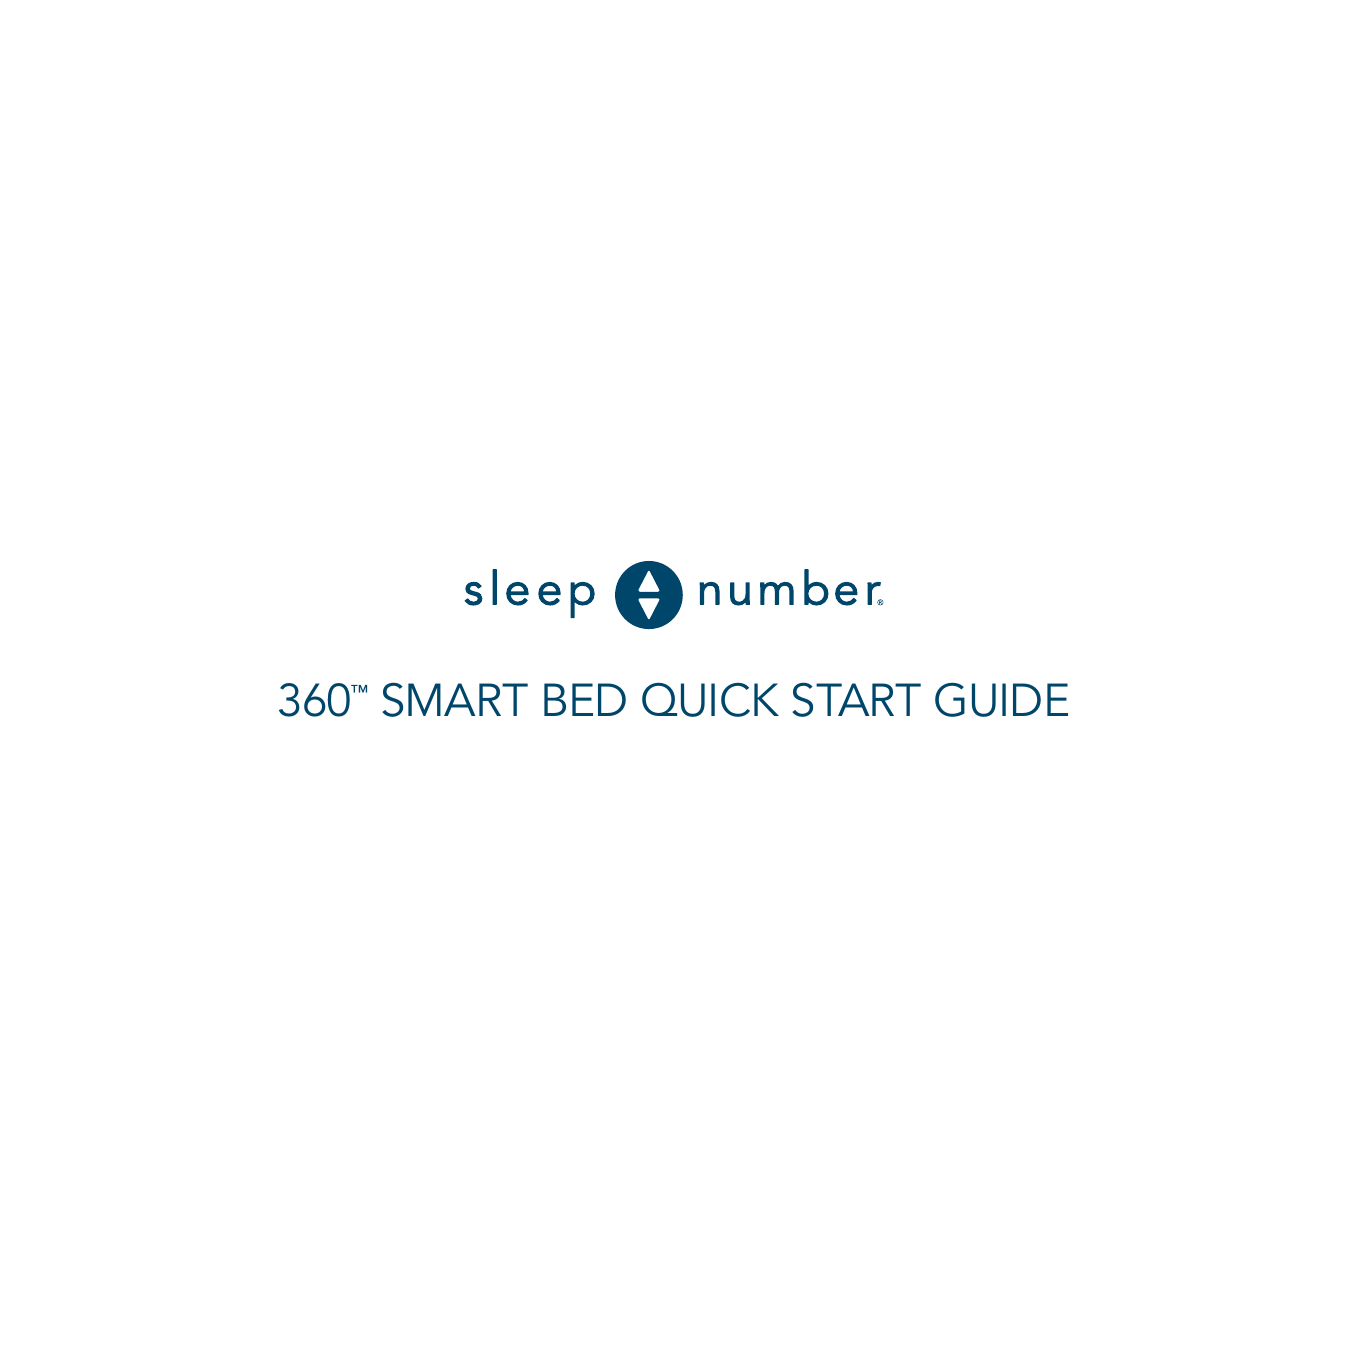 360™ SMART BED QUICK START GUIDE